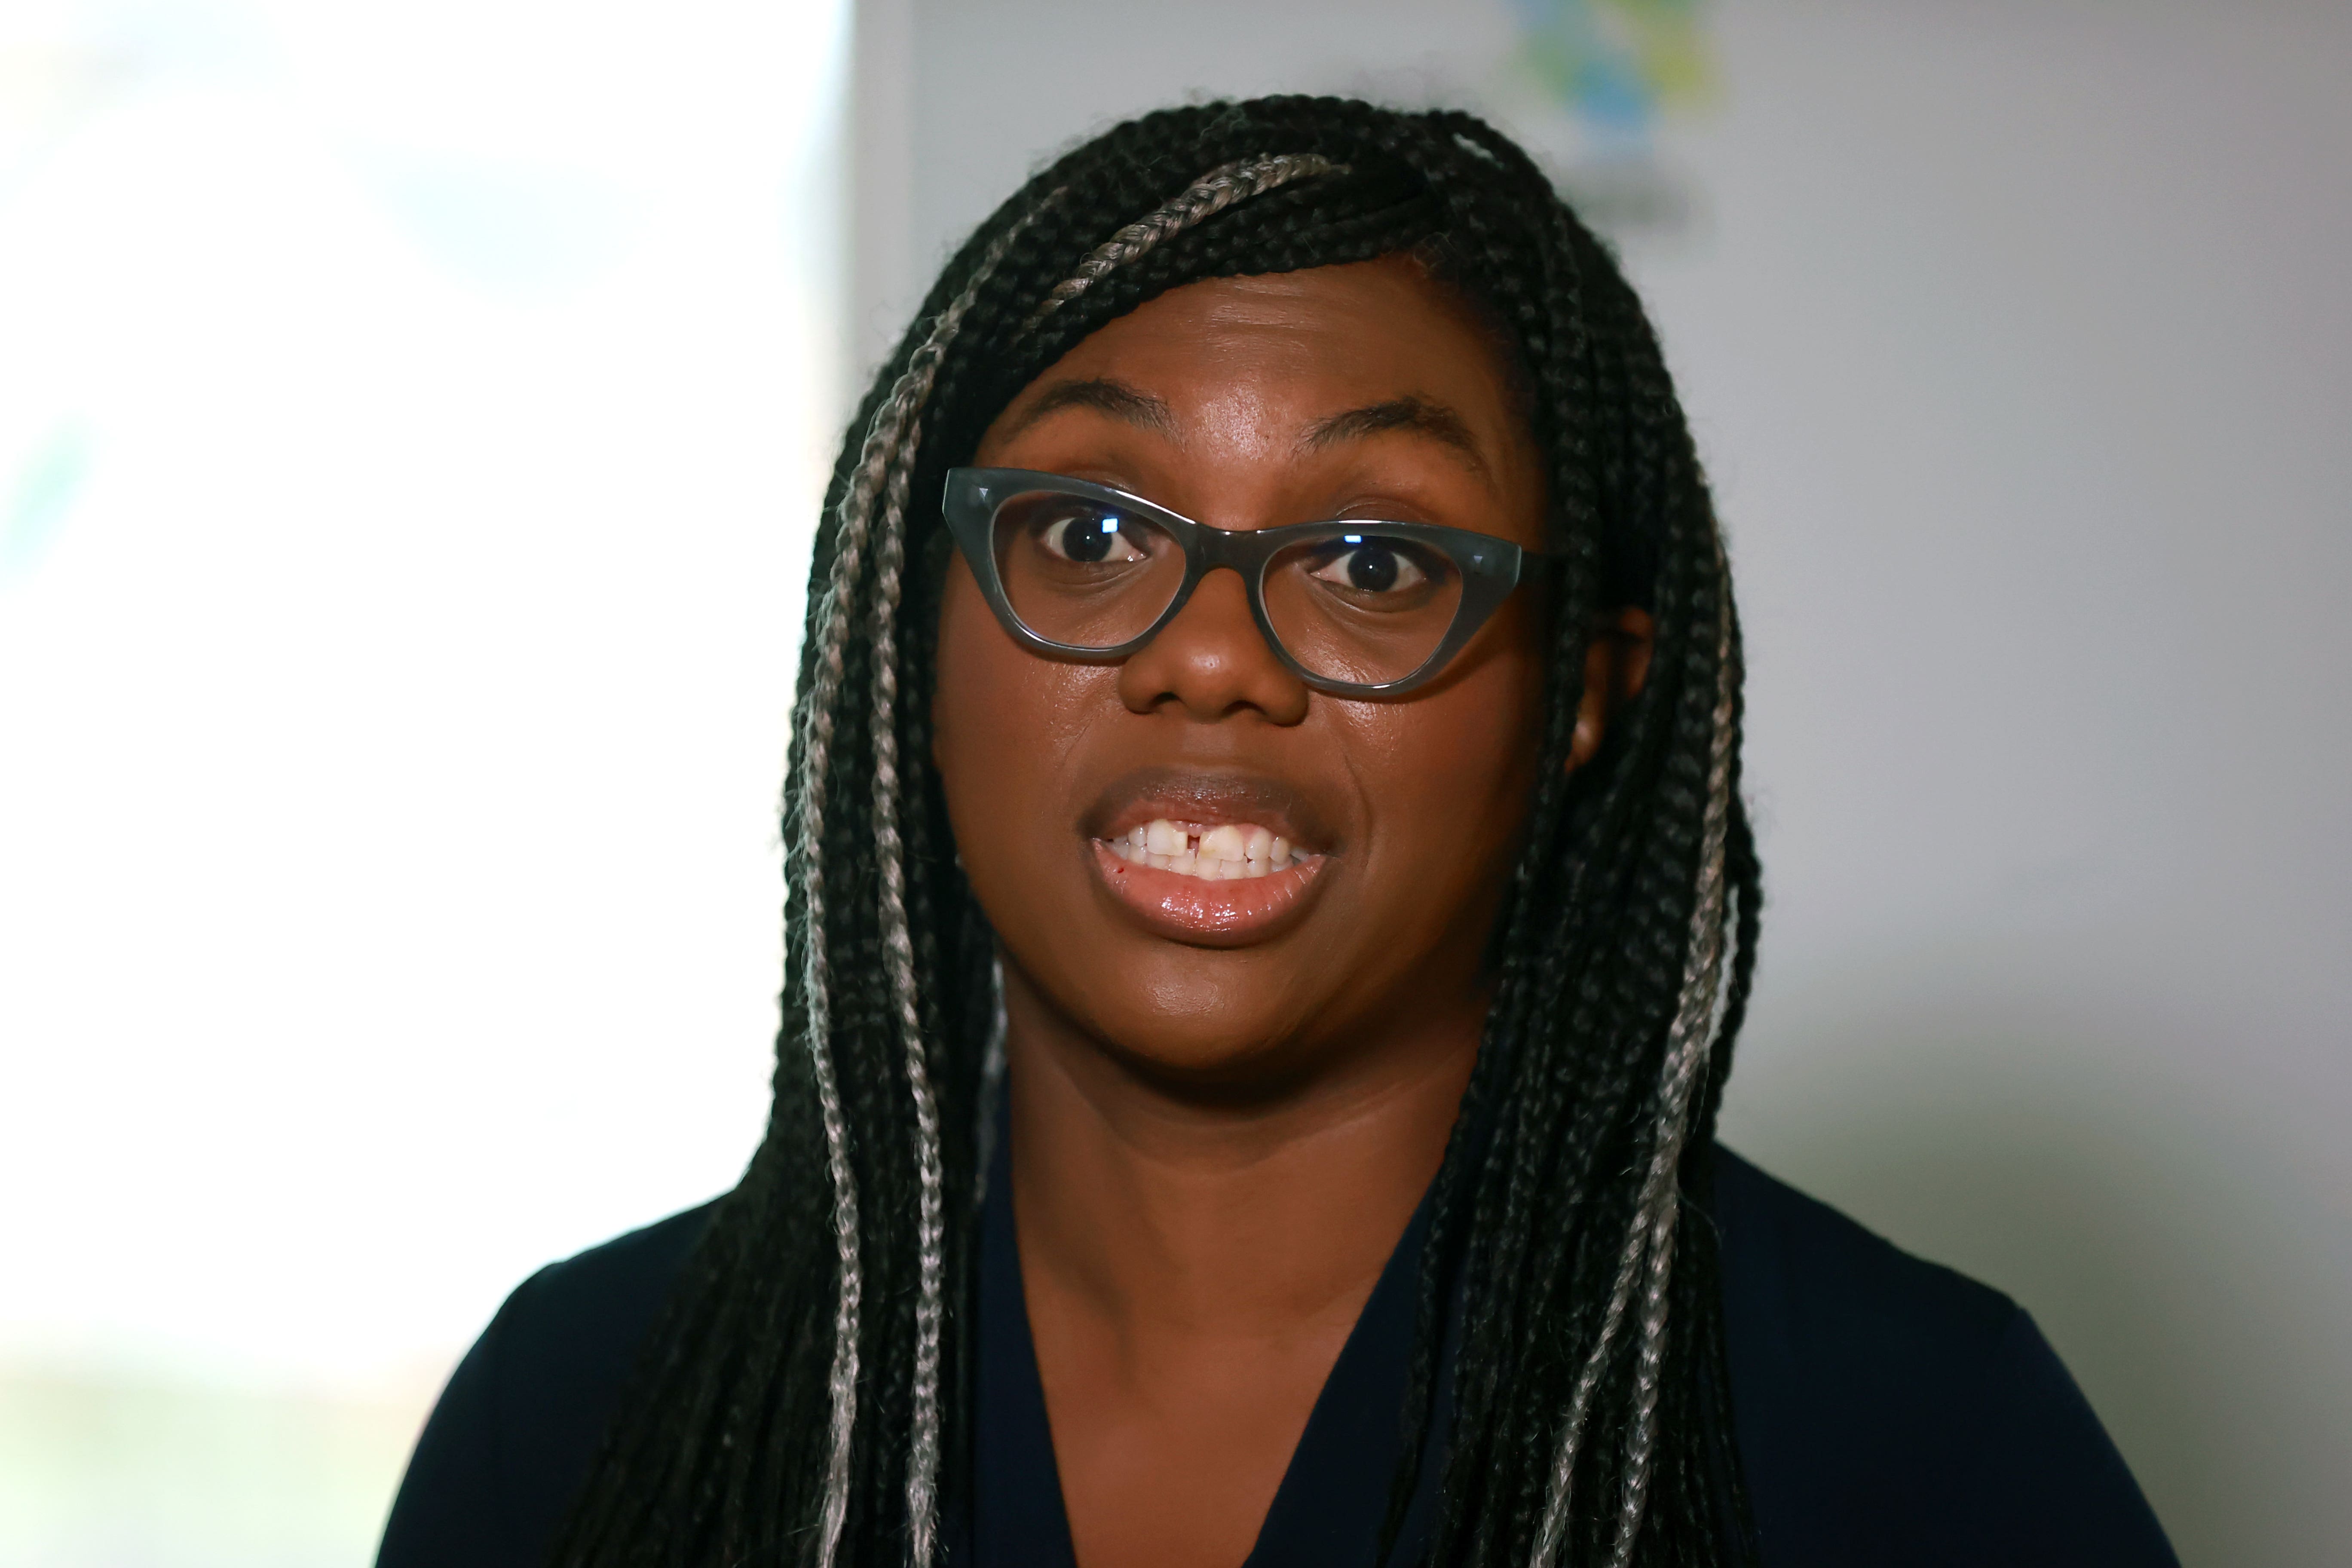 Unity candidate in waiting: Kemi Badenoch, the business secretary